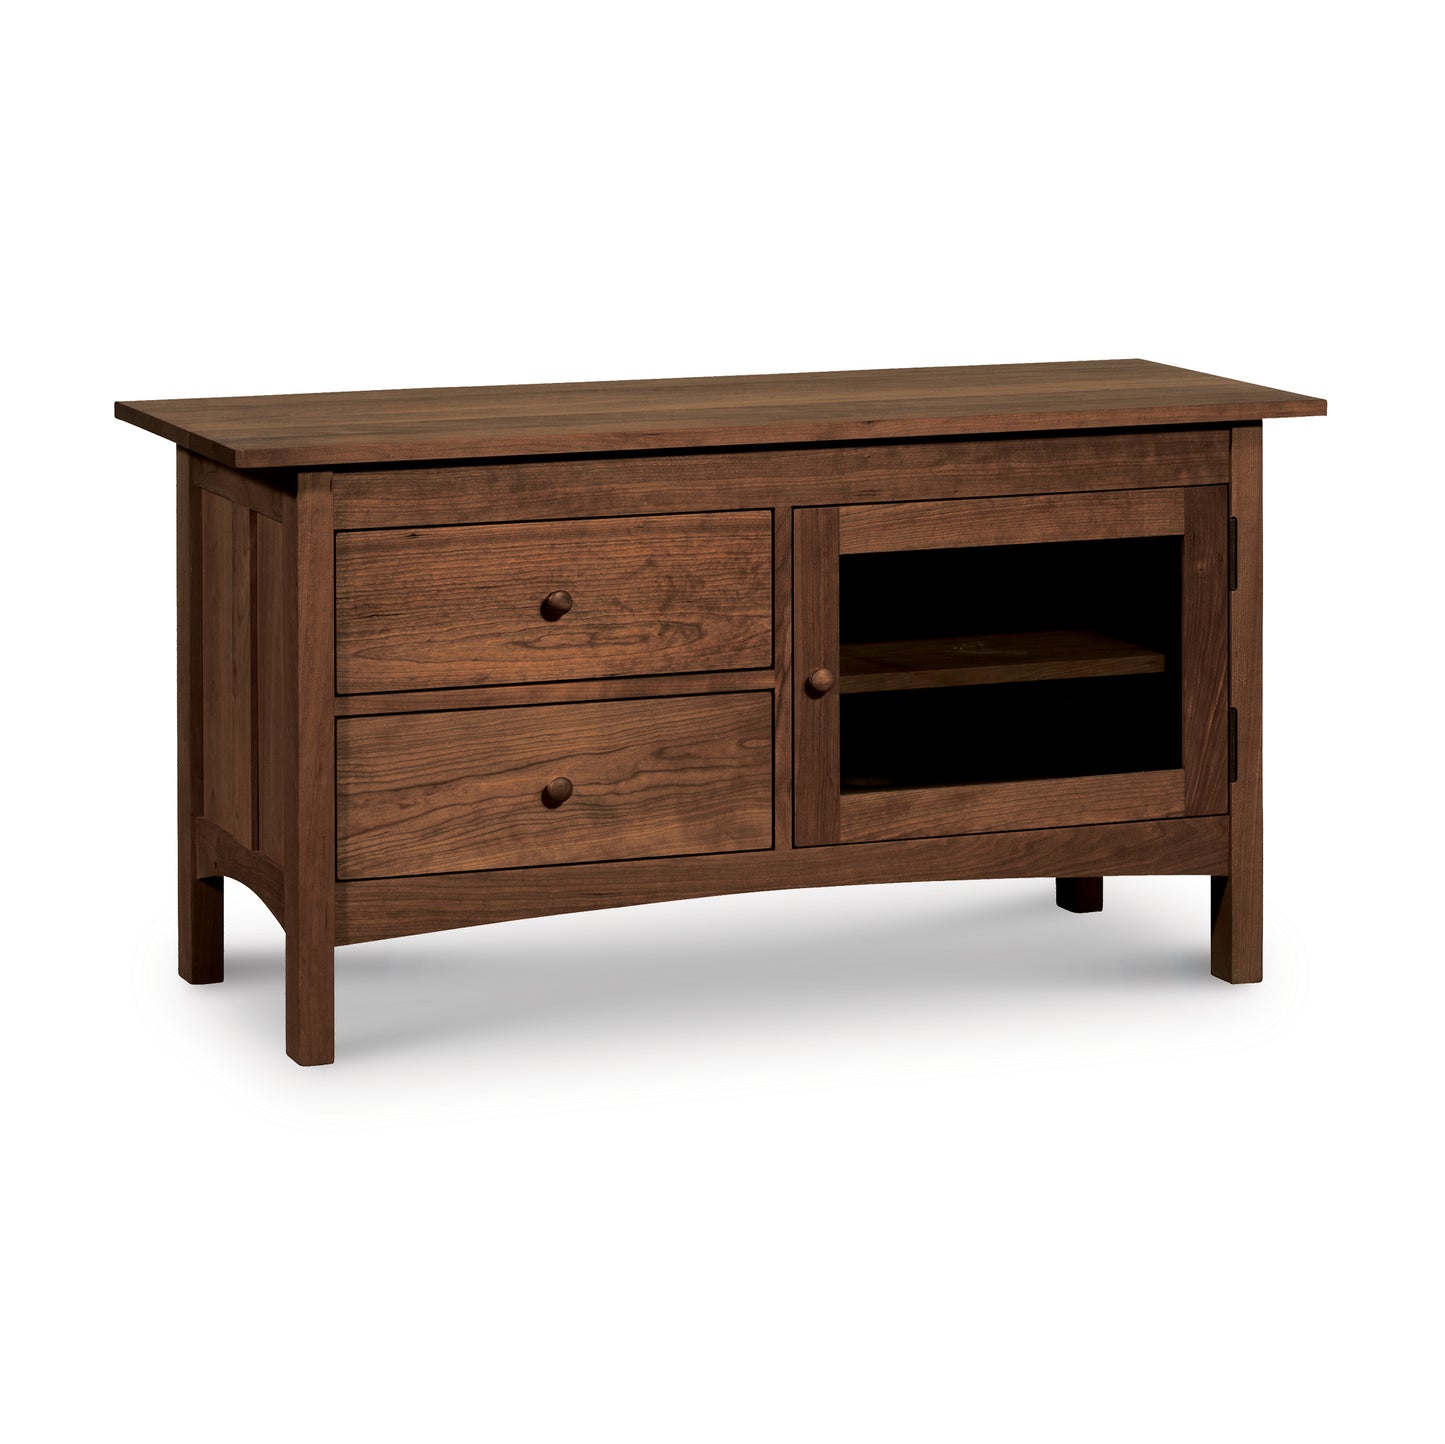 A stylish Burlington Shaker Two Drawer Media Console by Vermont Furniture Designs, perfect for your entertainment needs.